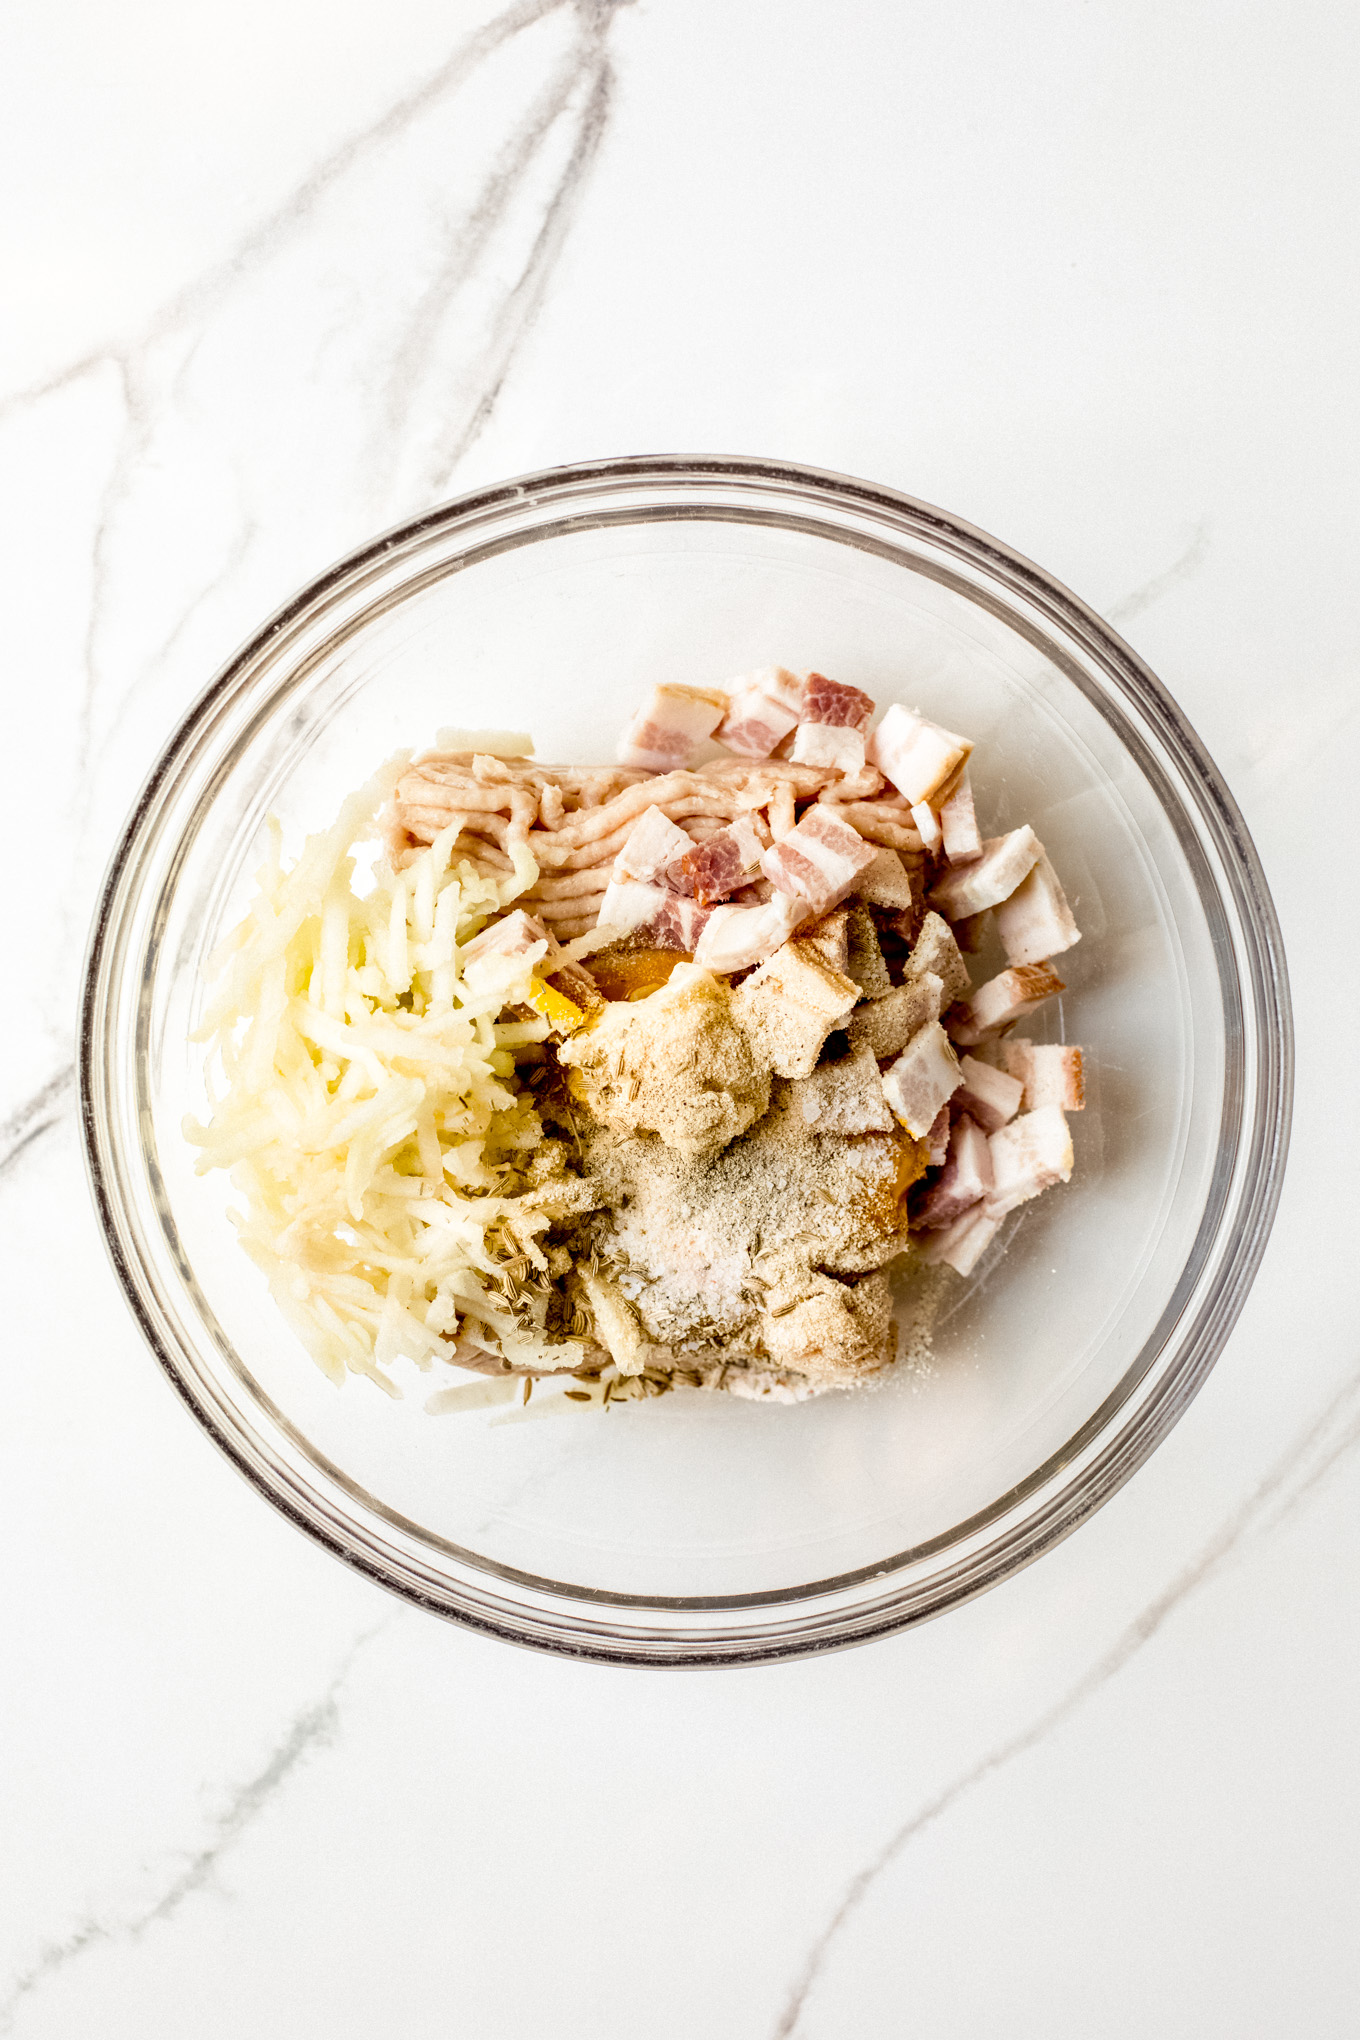 ground chicken, chopped bacon, and shredded apples with spices in a glass bowl.